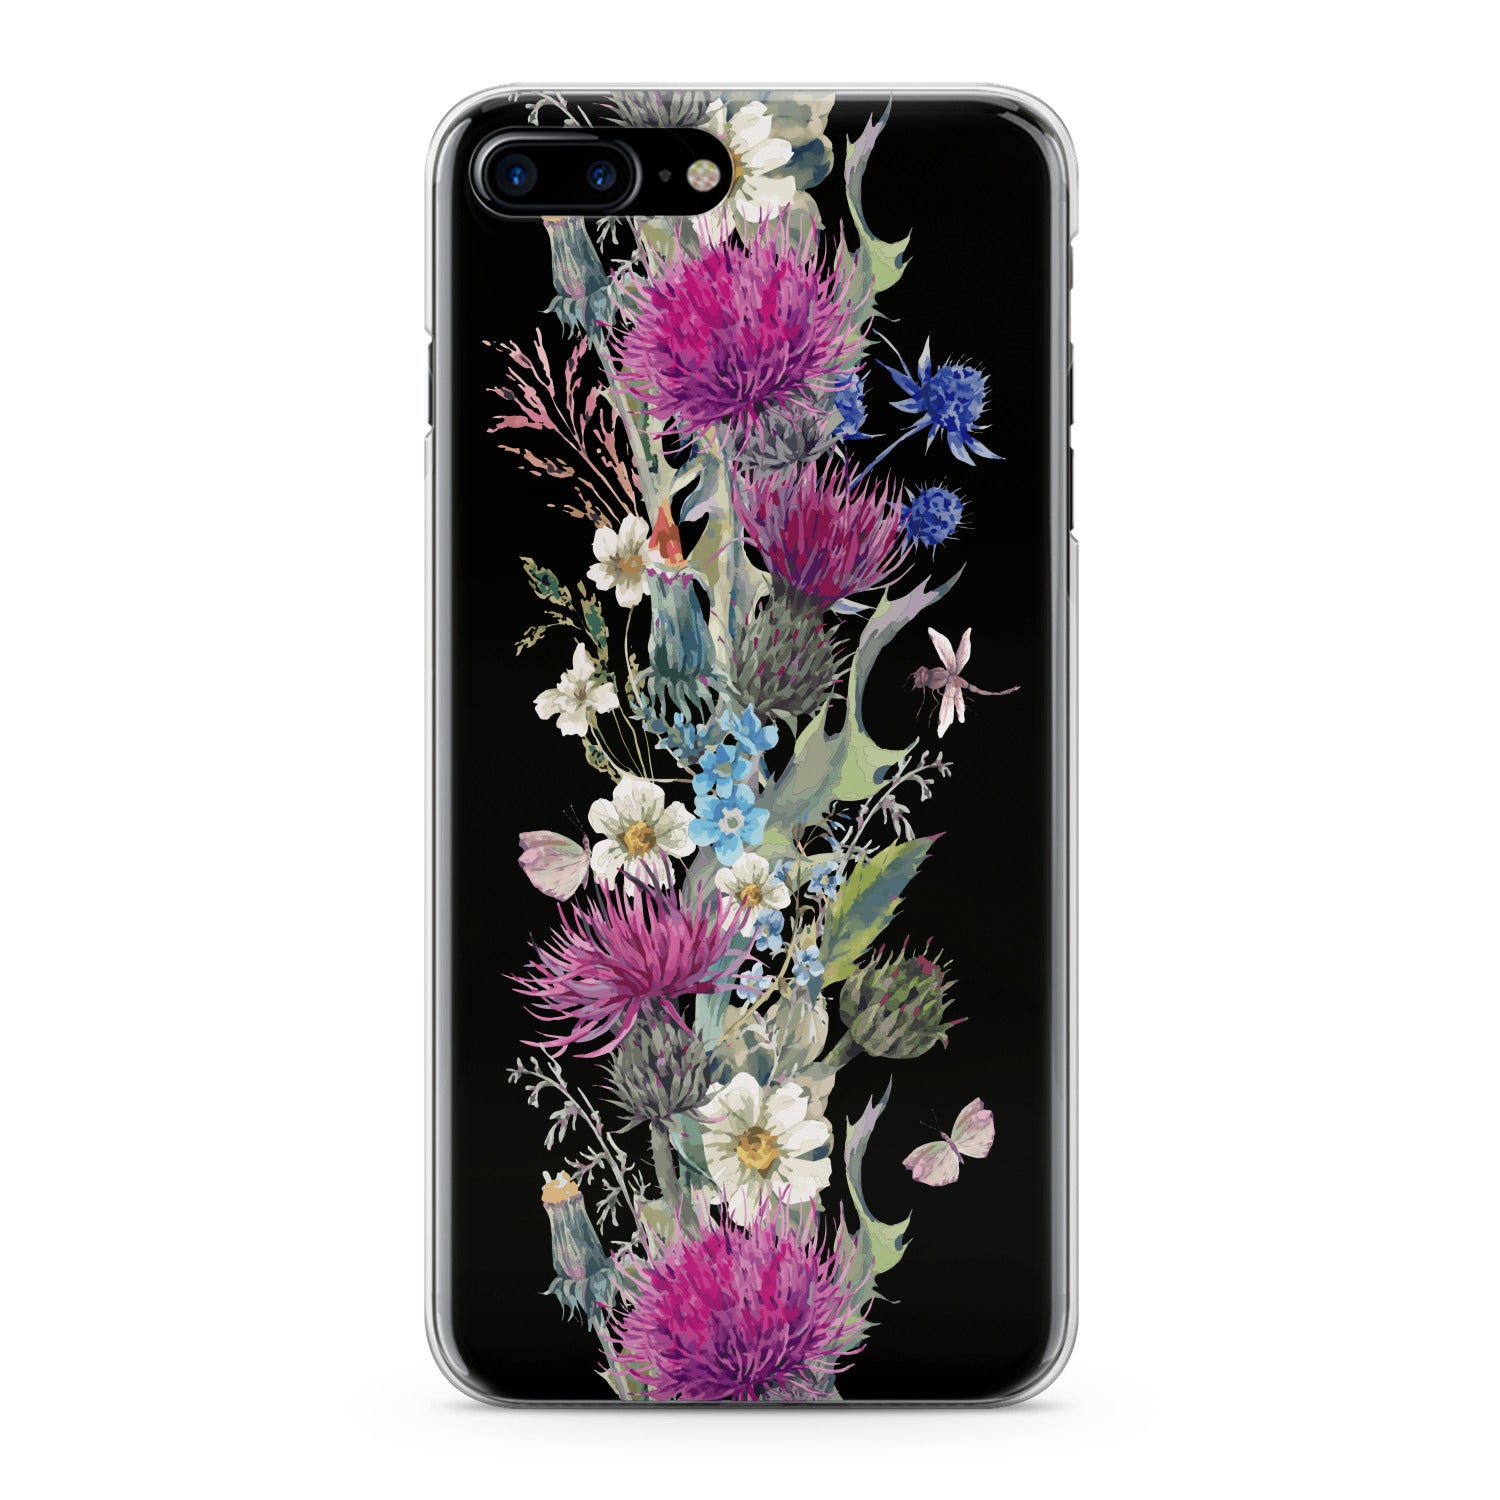 Lex Altern Wildflowers Bouquet Phone Case for your iPhone & Android phone.